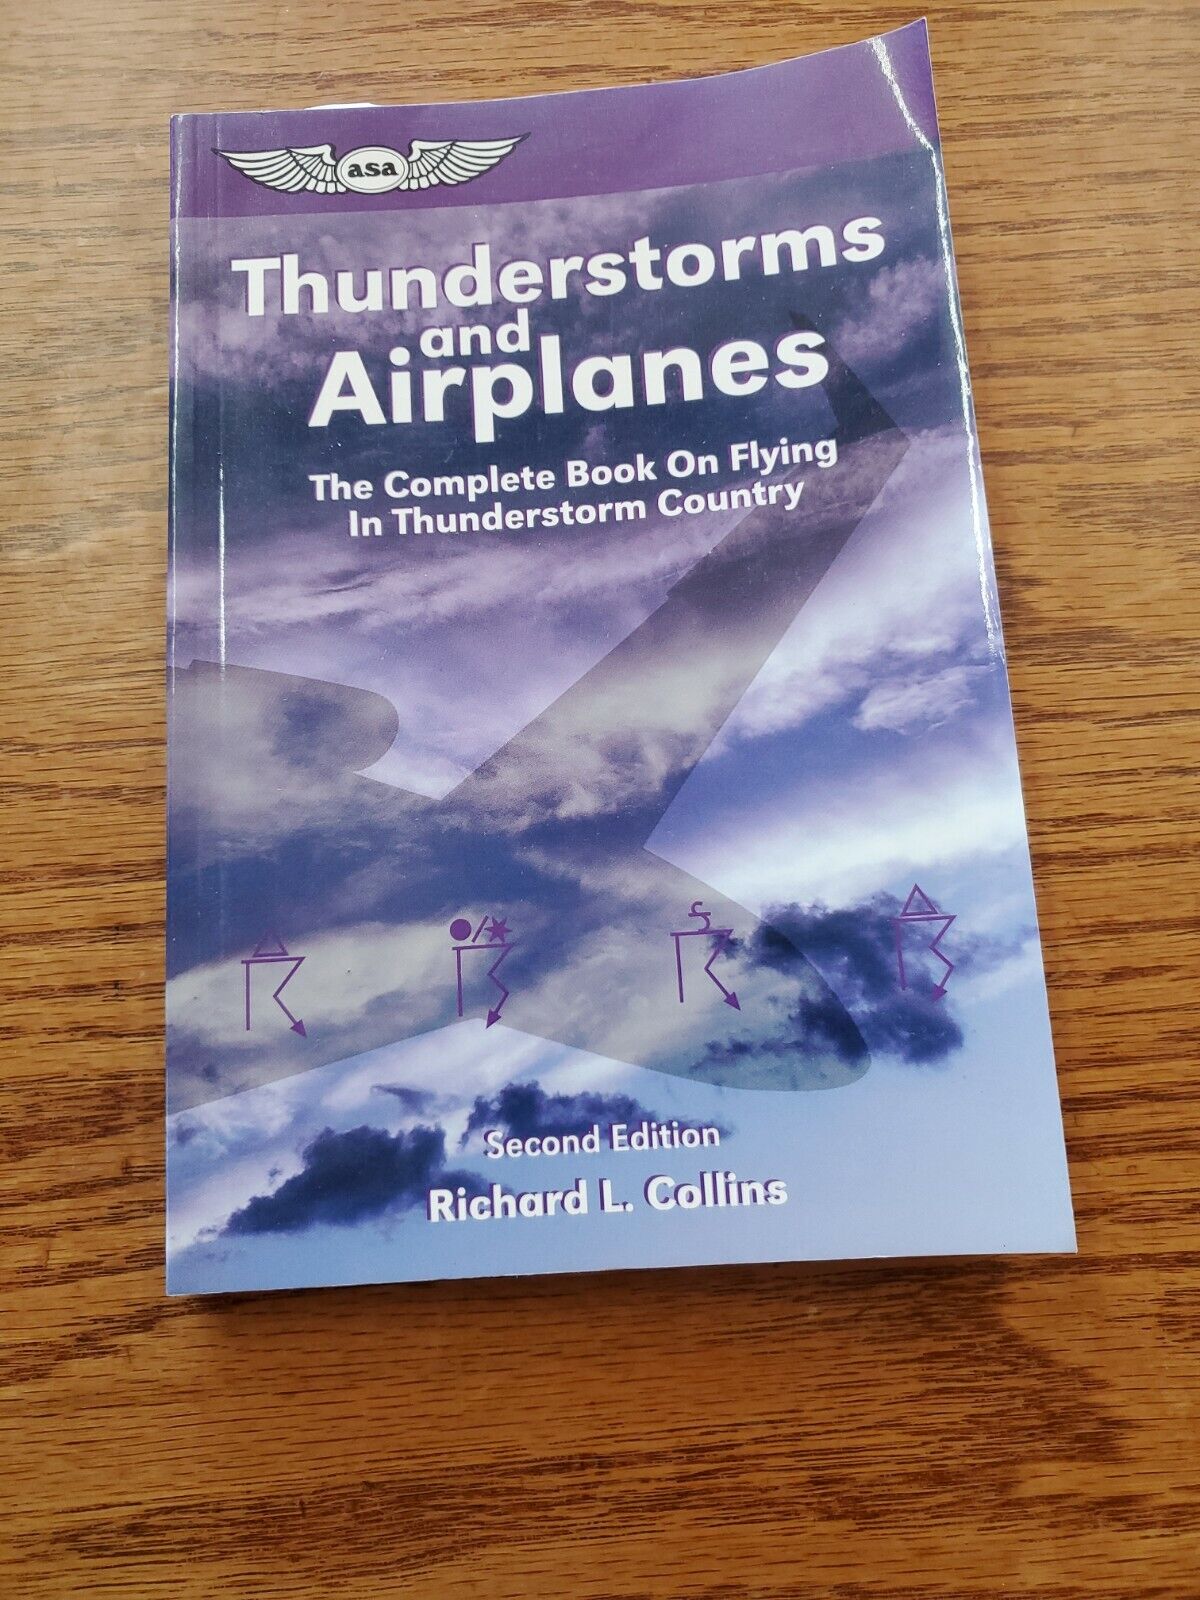 Thunderstorms and Airplanes: The Complete Book on Flying in Thunderstorm Country